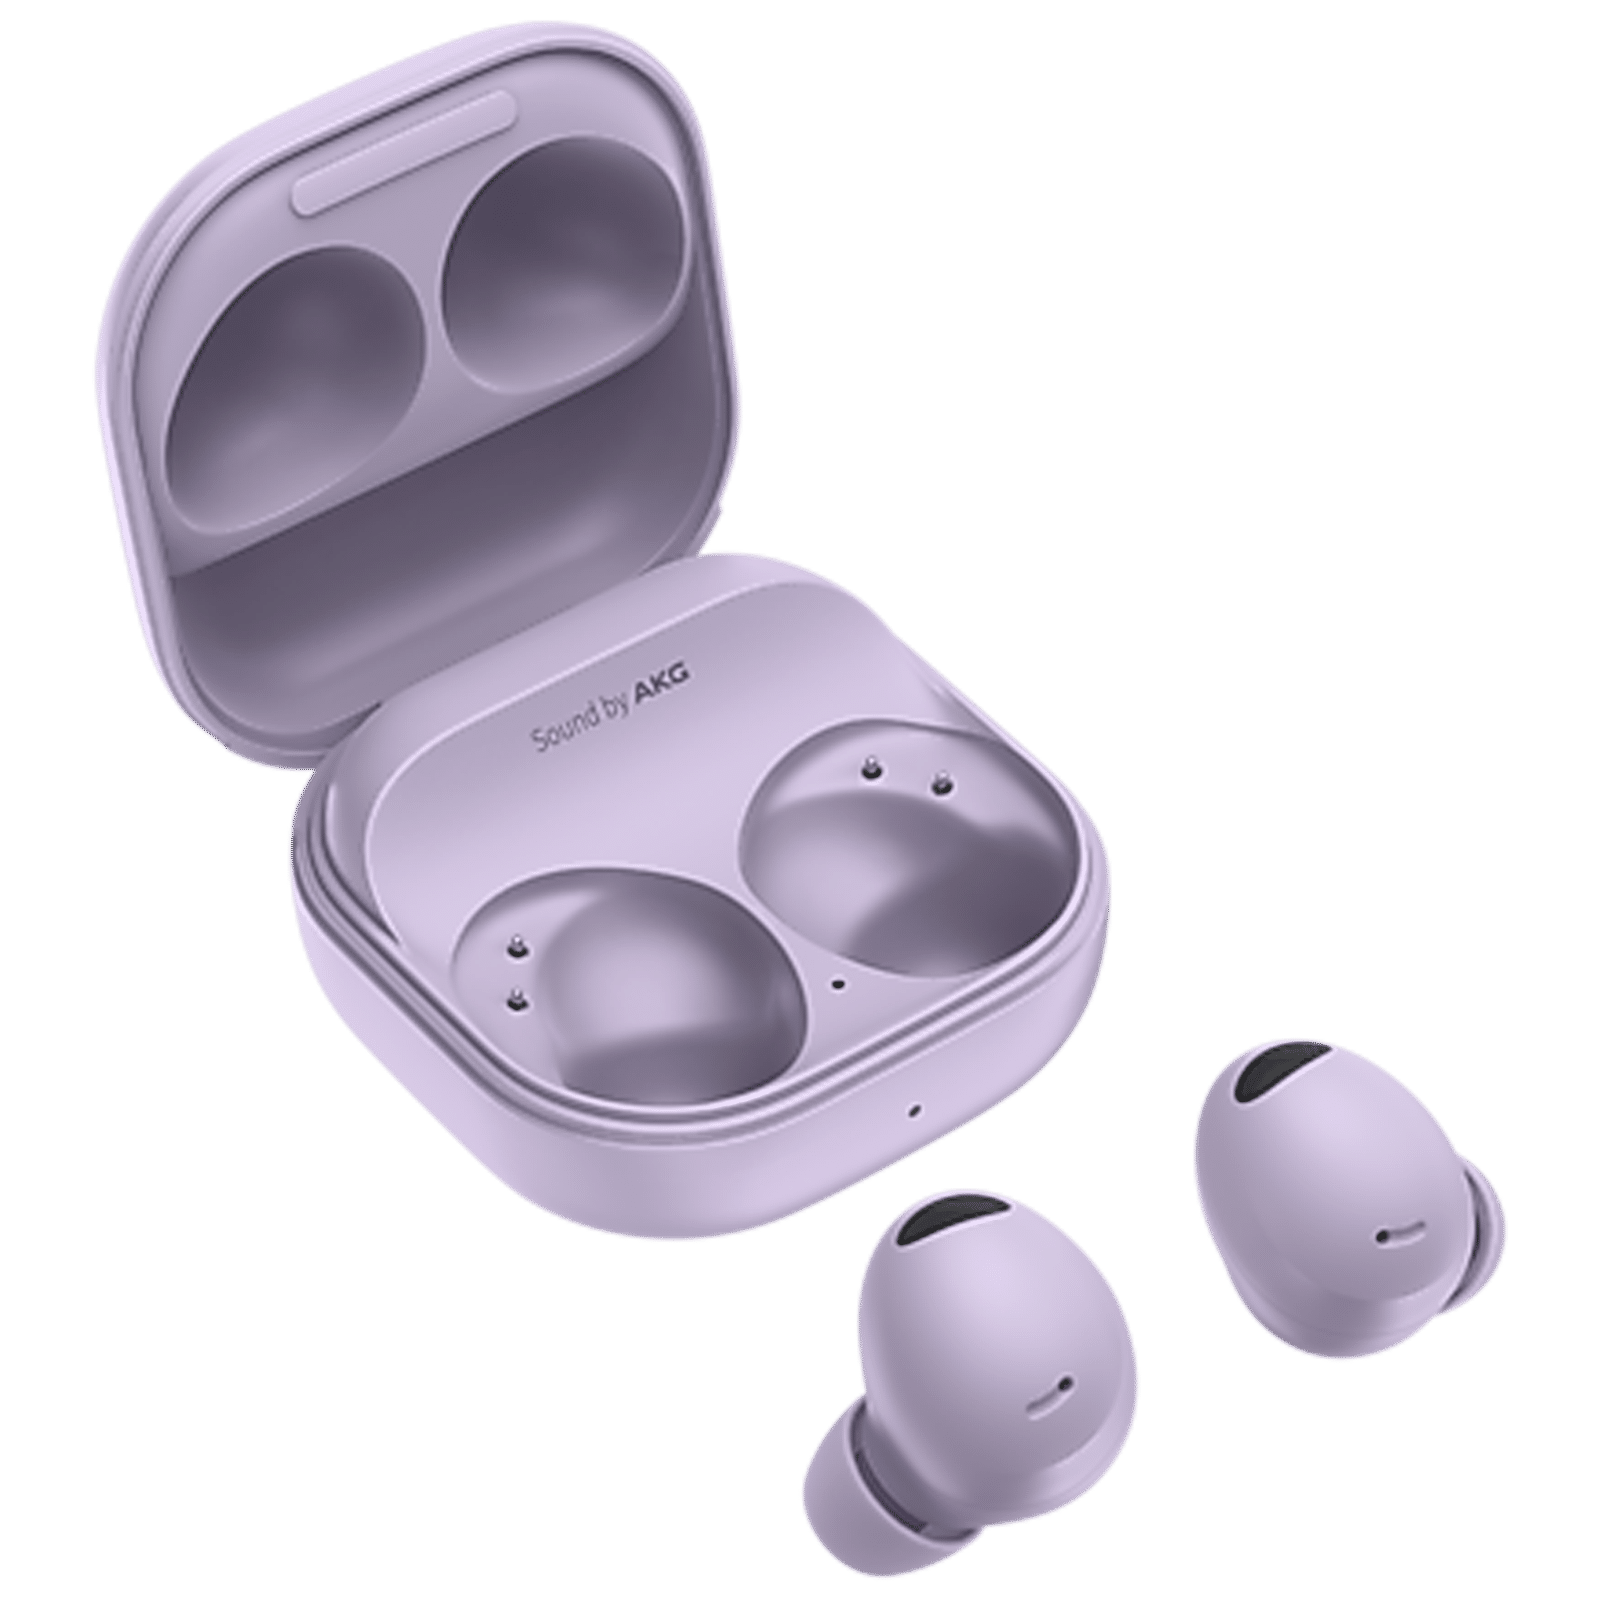 SAMSUNG Galaxy Buds 2 Pro True Wireless Bluetooth Earbuds, Noise  Cancelling, Hi-Fi Sound, 360 Audio, Comfort In Ear Fit, HD Voice,  Conversation Mode